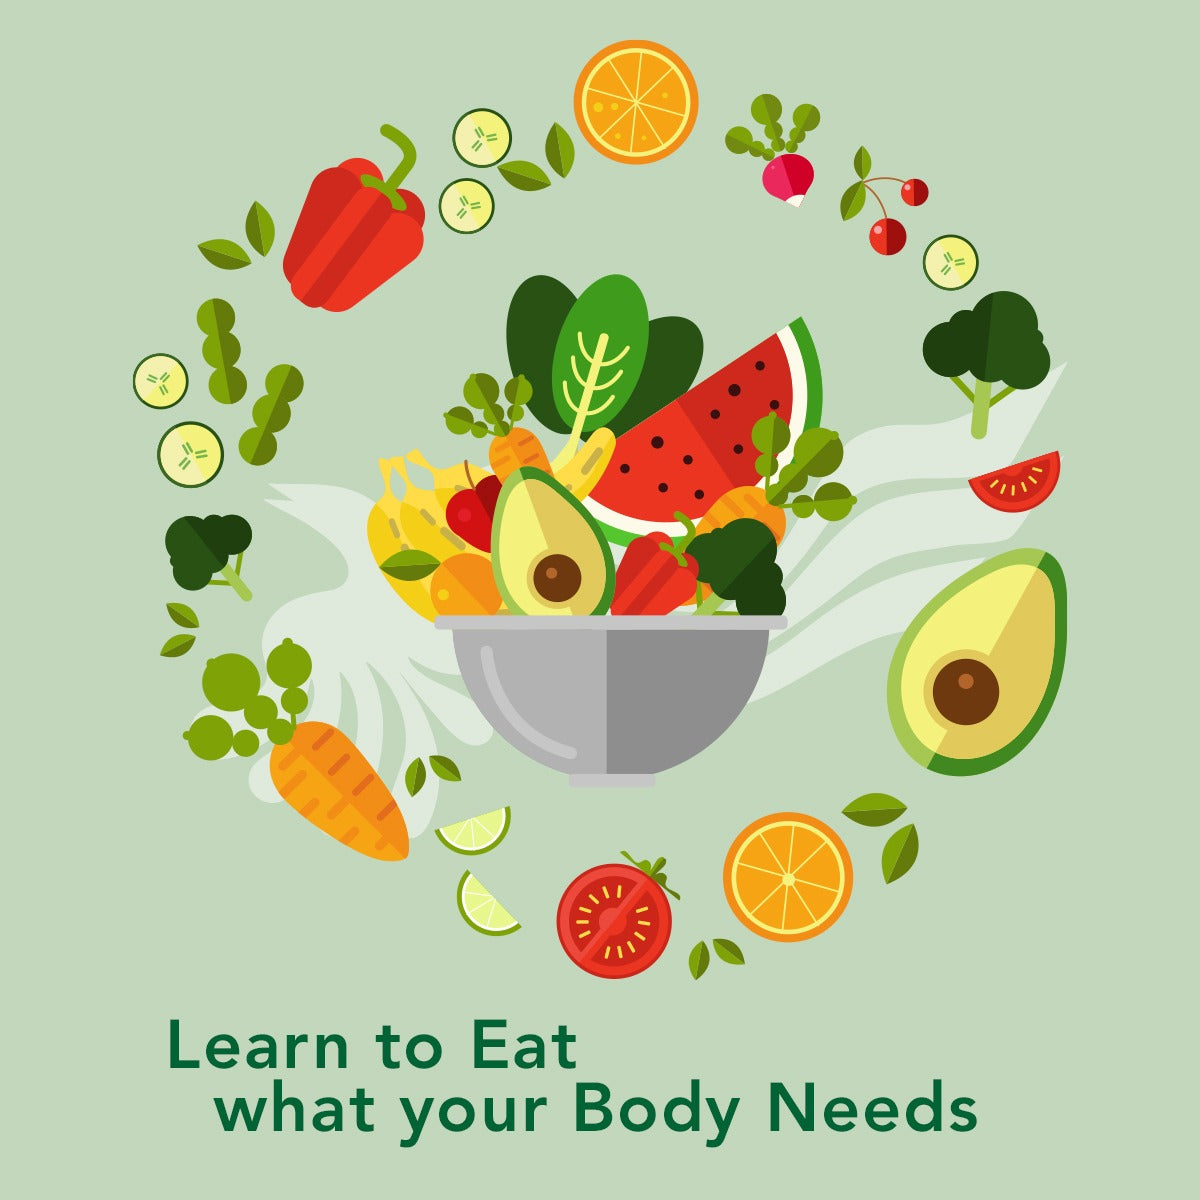 Learn to Eat what your Body Needs.